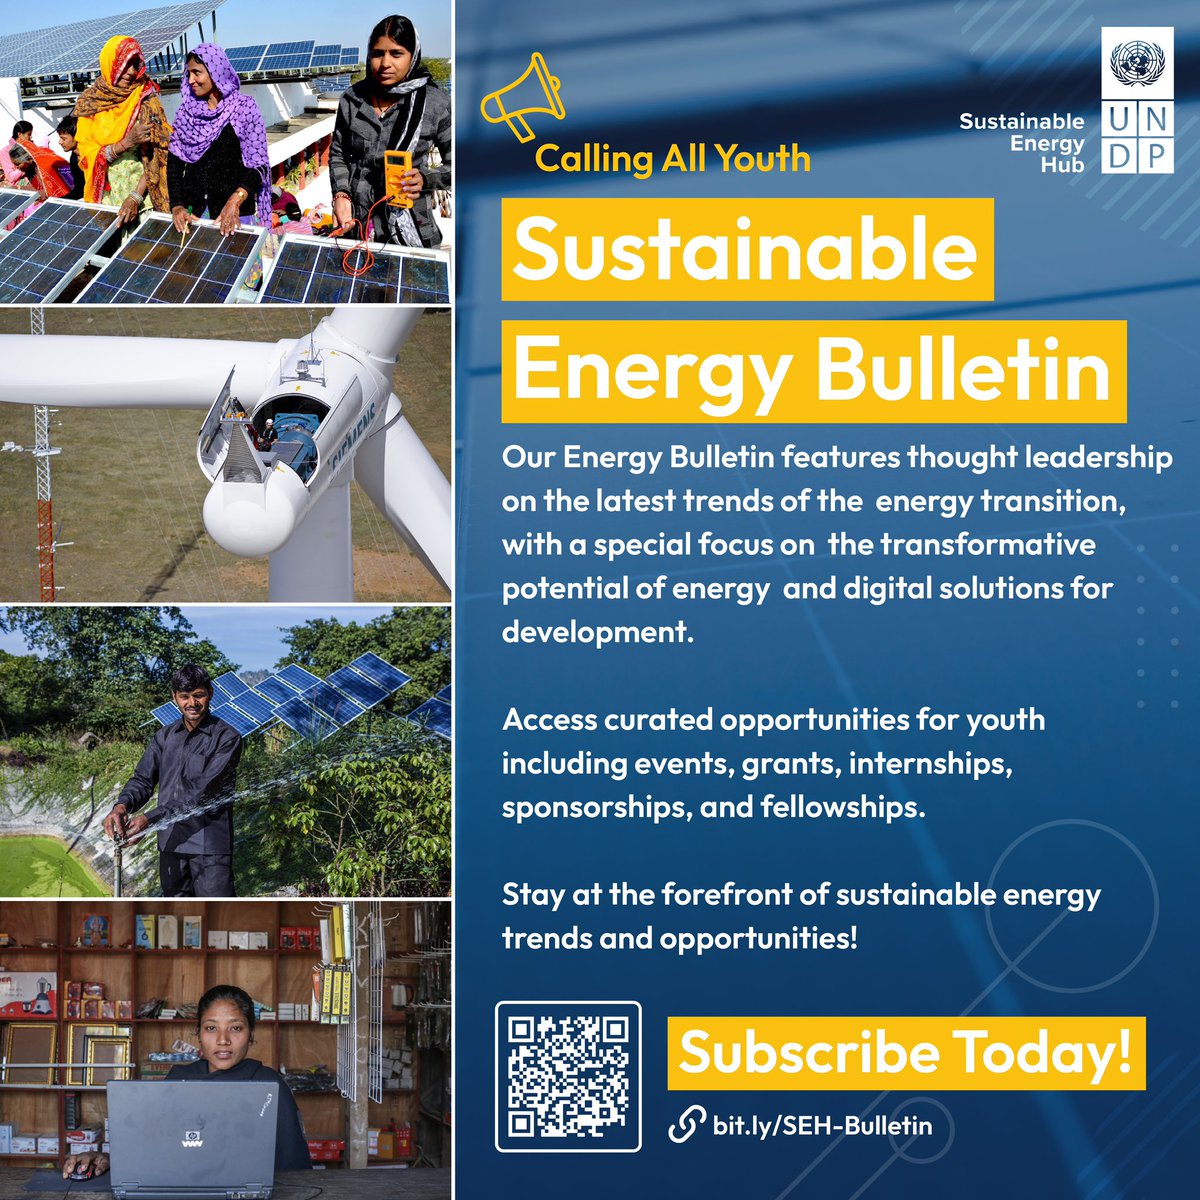 ⚡️Calling all youth energy leaders to subscribe to the Sustainable Energy Bulletin! Find opportunities for young professionals & students in the sector, & explore the latest trends of the energy transition. 👉 bit.ly/SEH-Bulletin #EnergyForDevelopment